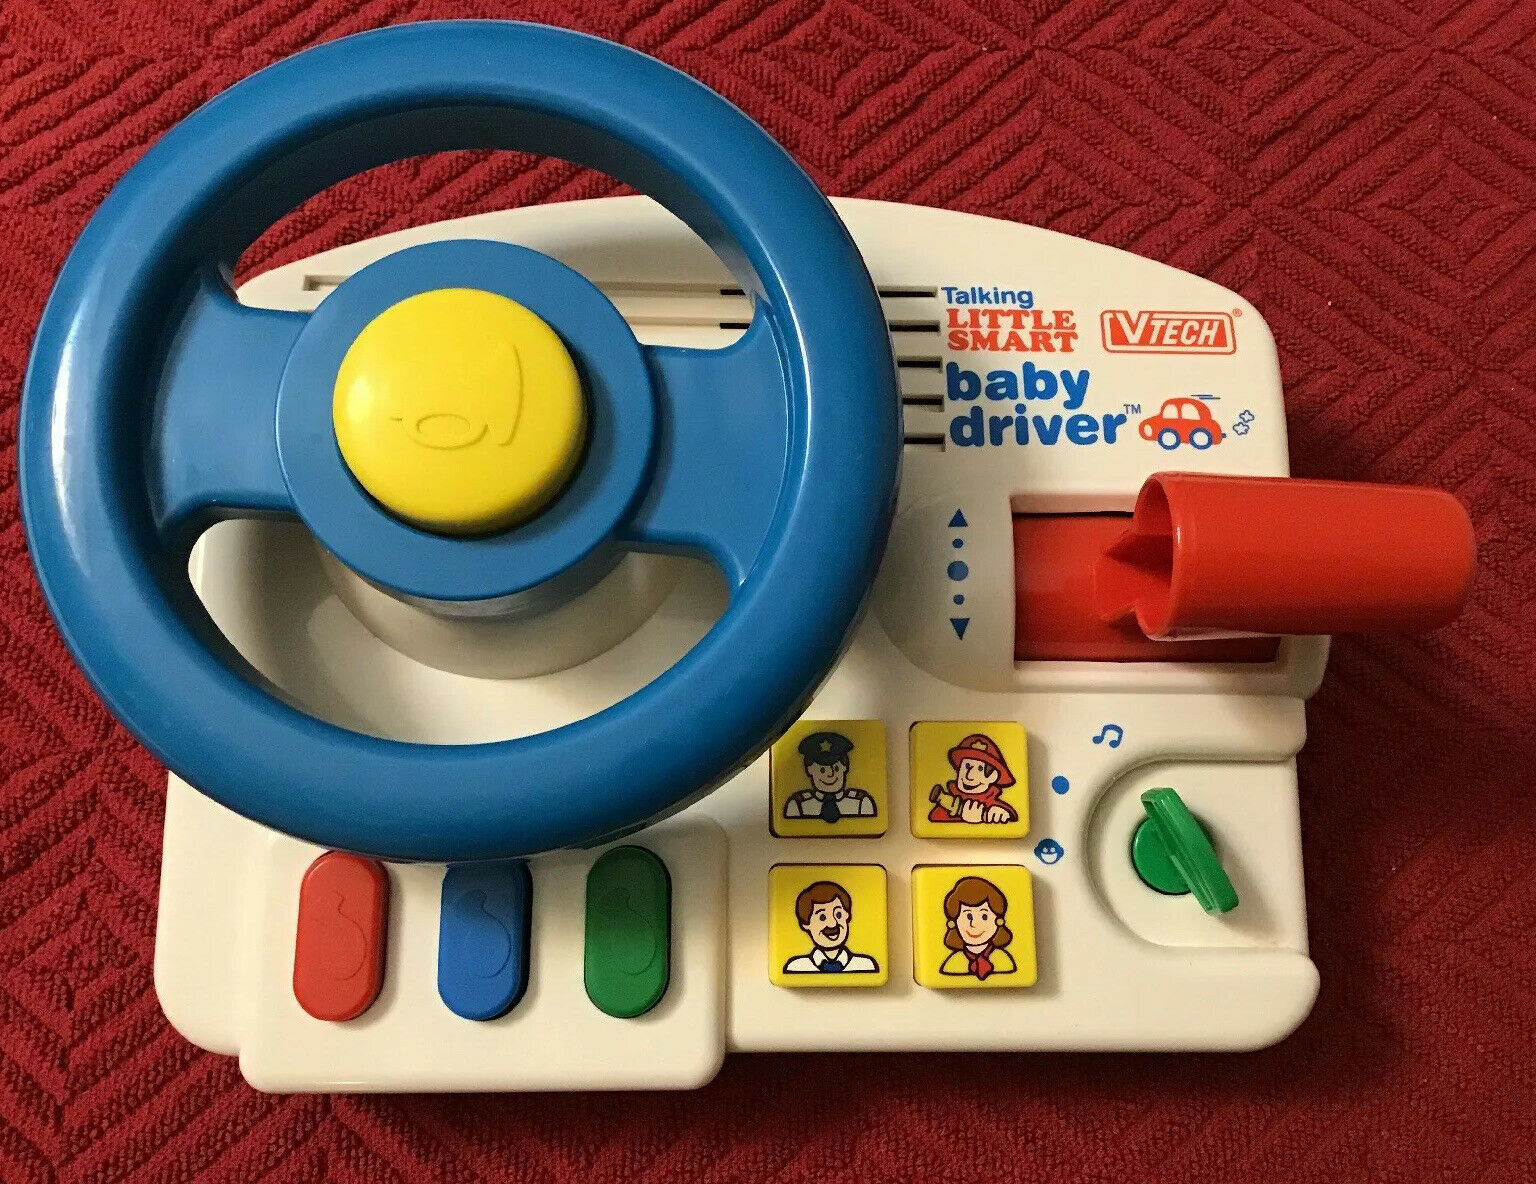 VTech Talking Little Smart BABY DRIVER - VINTAGE, Countless Features, WORKS!!! - $31.68